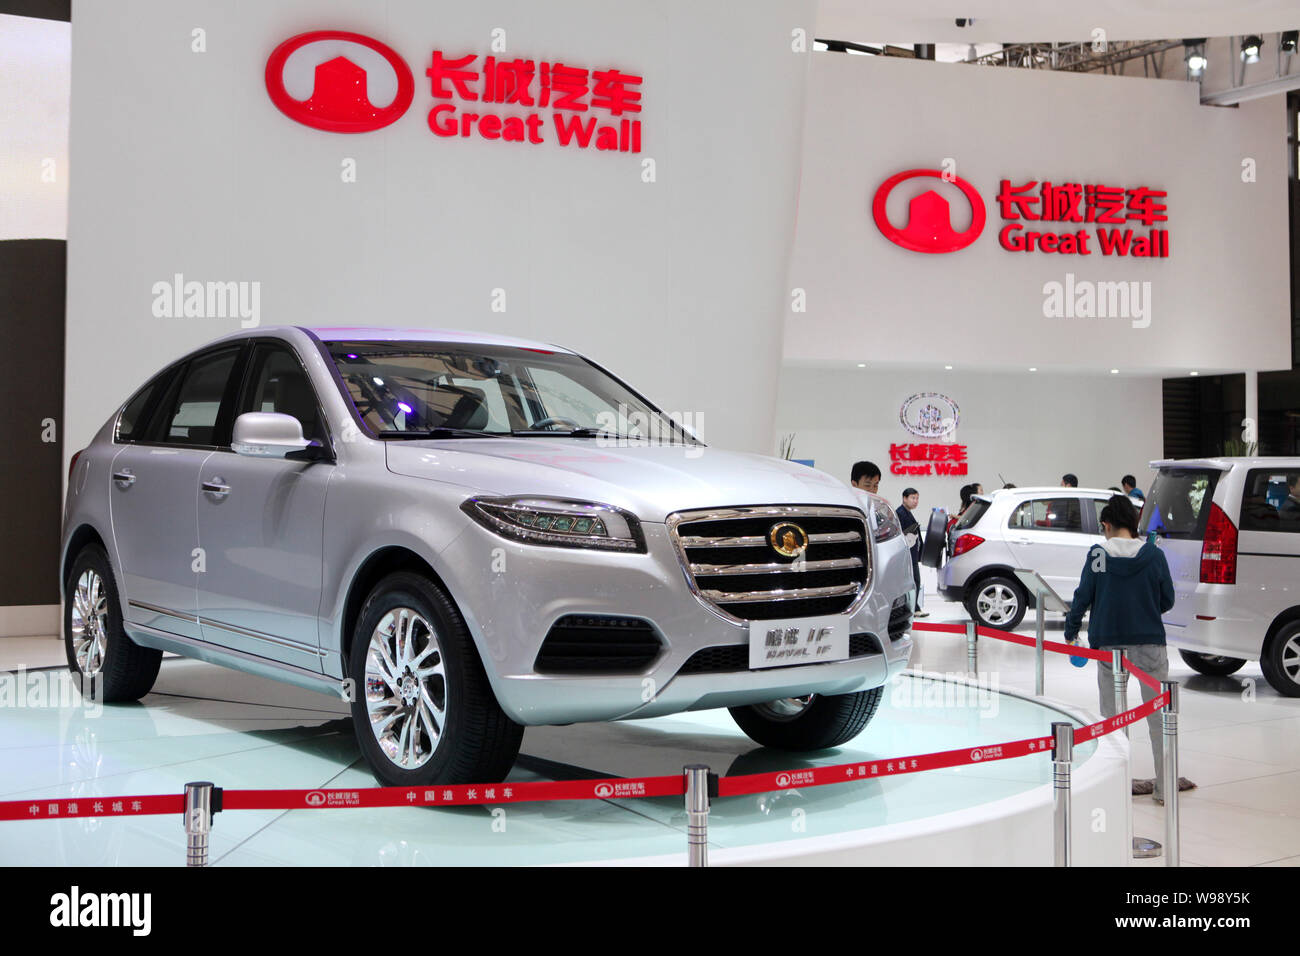 Great Wall Motors Quits India Without A Single Launch